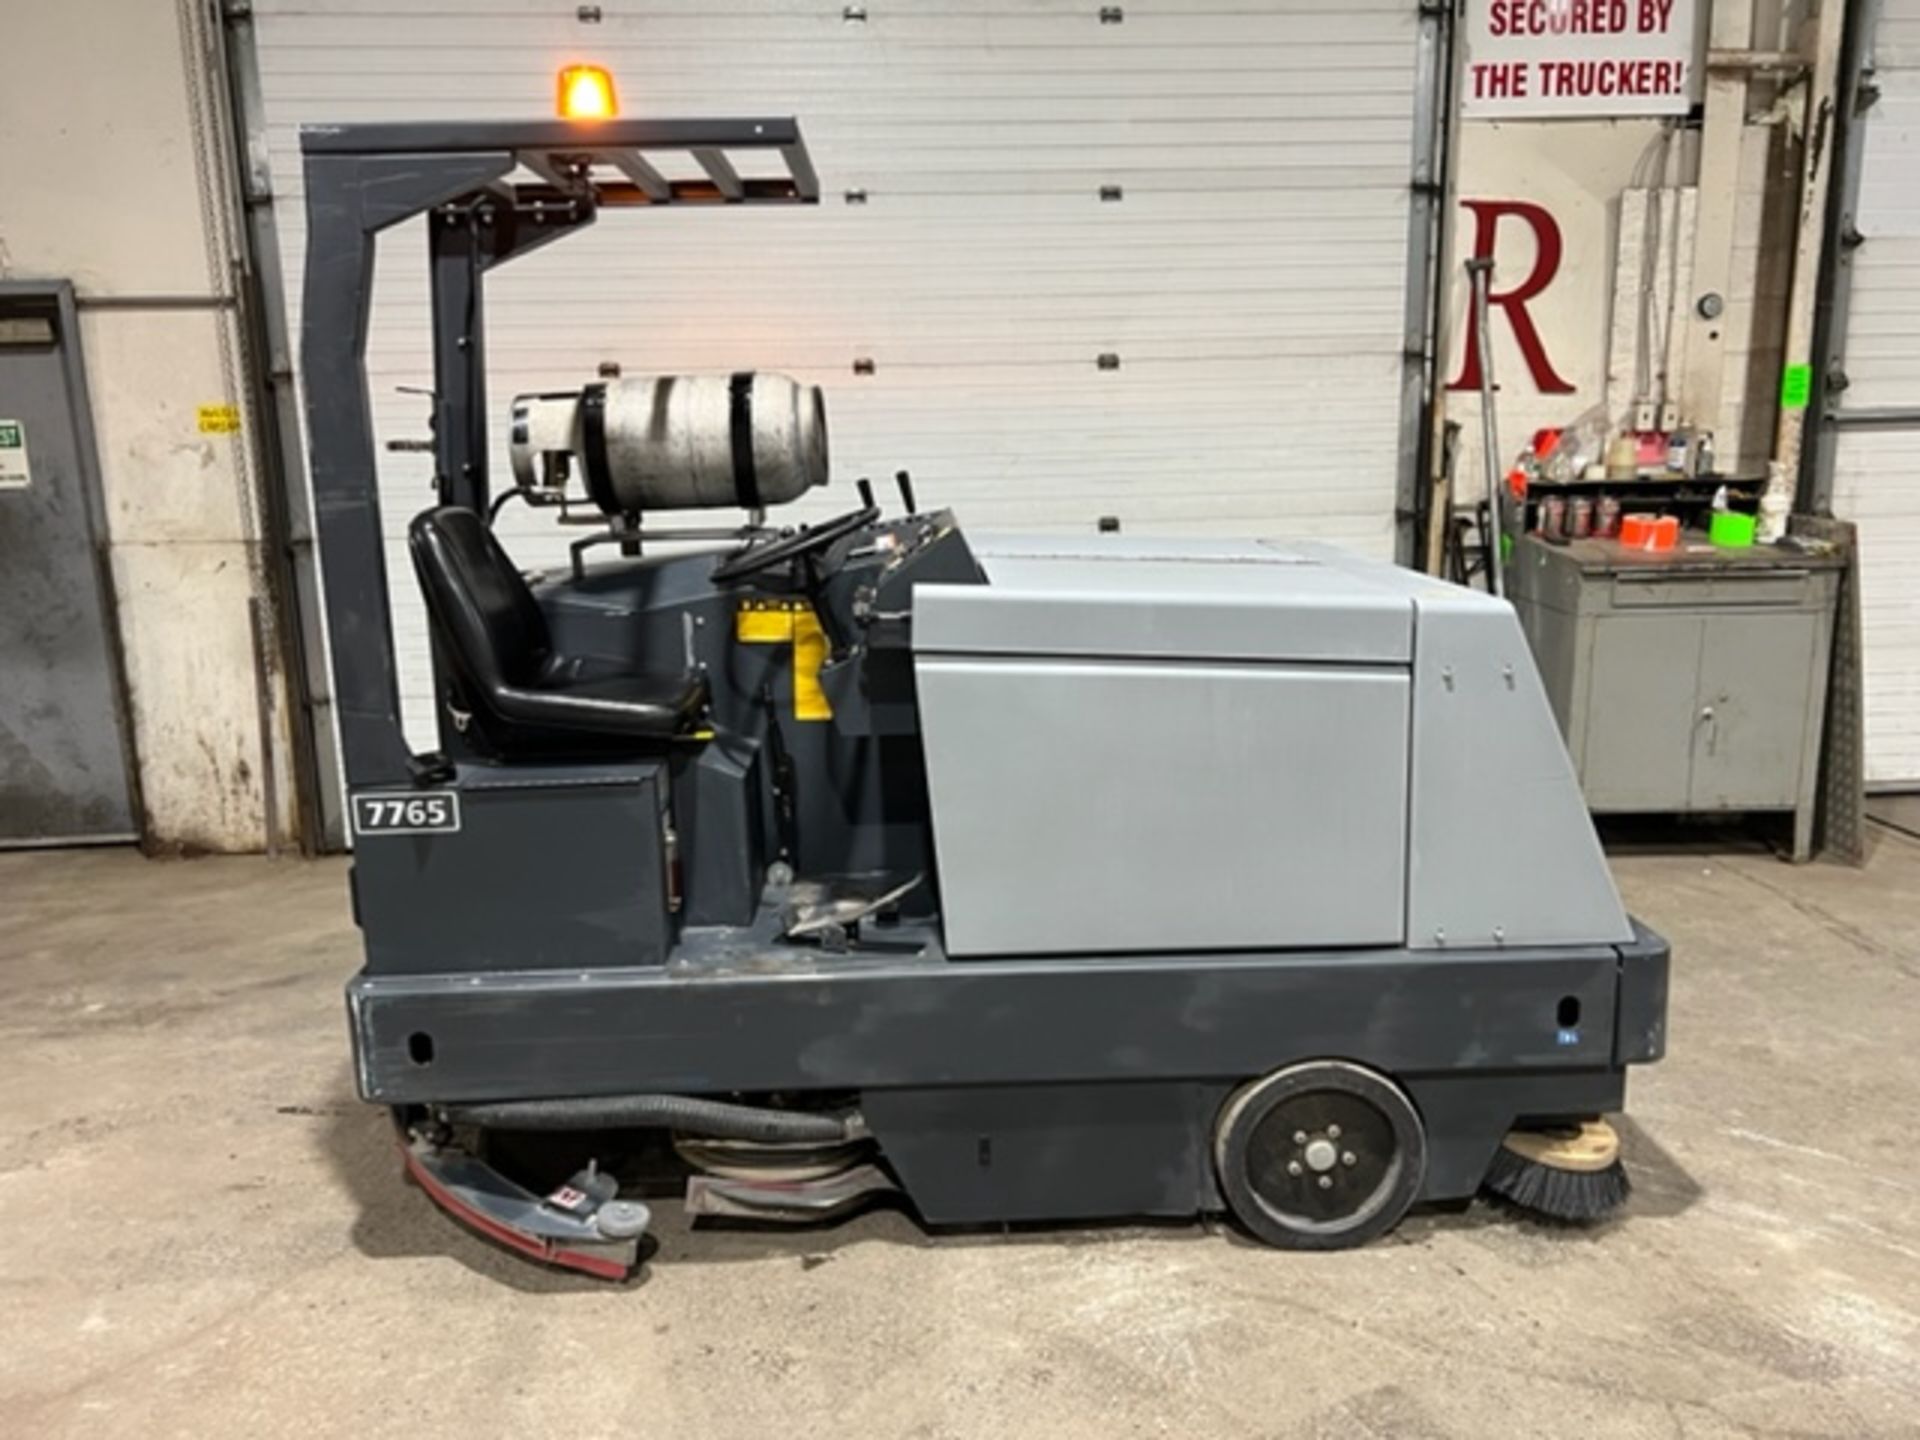 2014 Nilfisk Advance Model 7765 Floor Cleaning Machine Sweeper Scrubber Unit LPG (propane) with